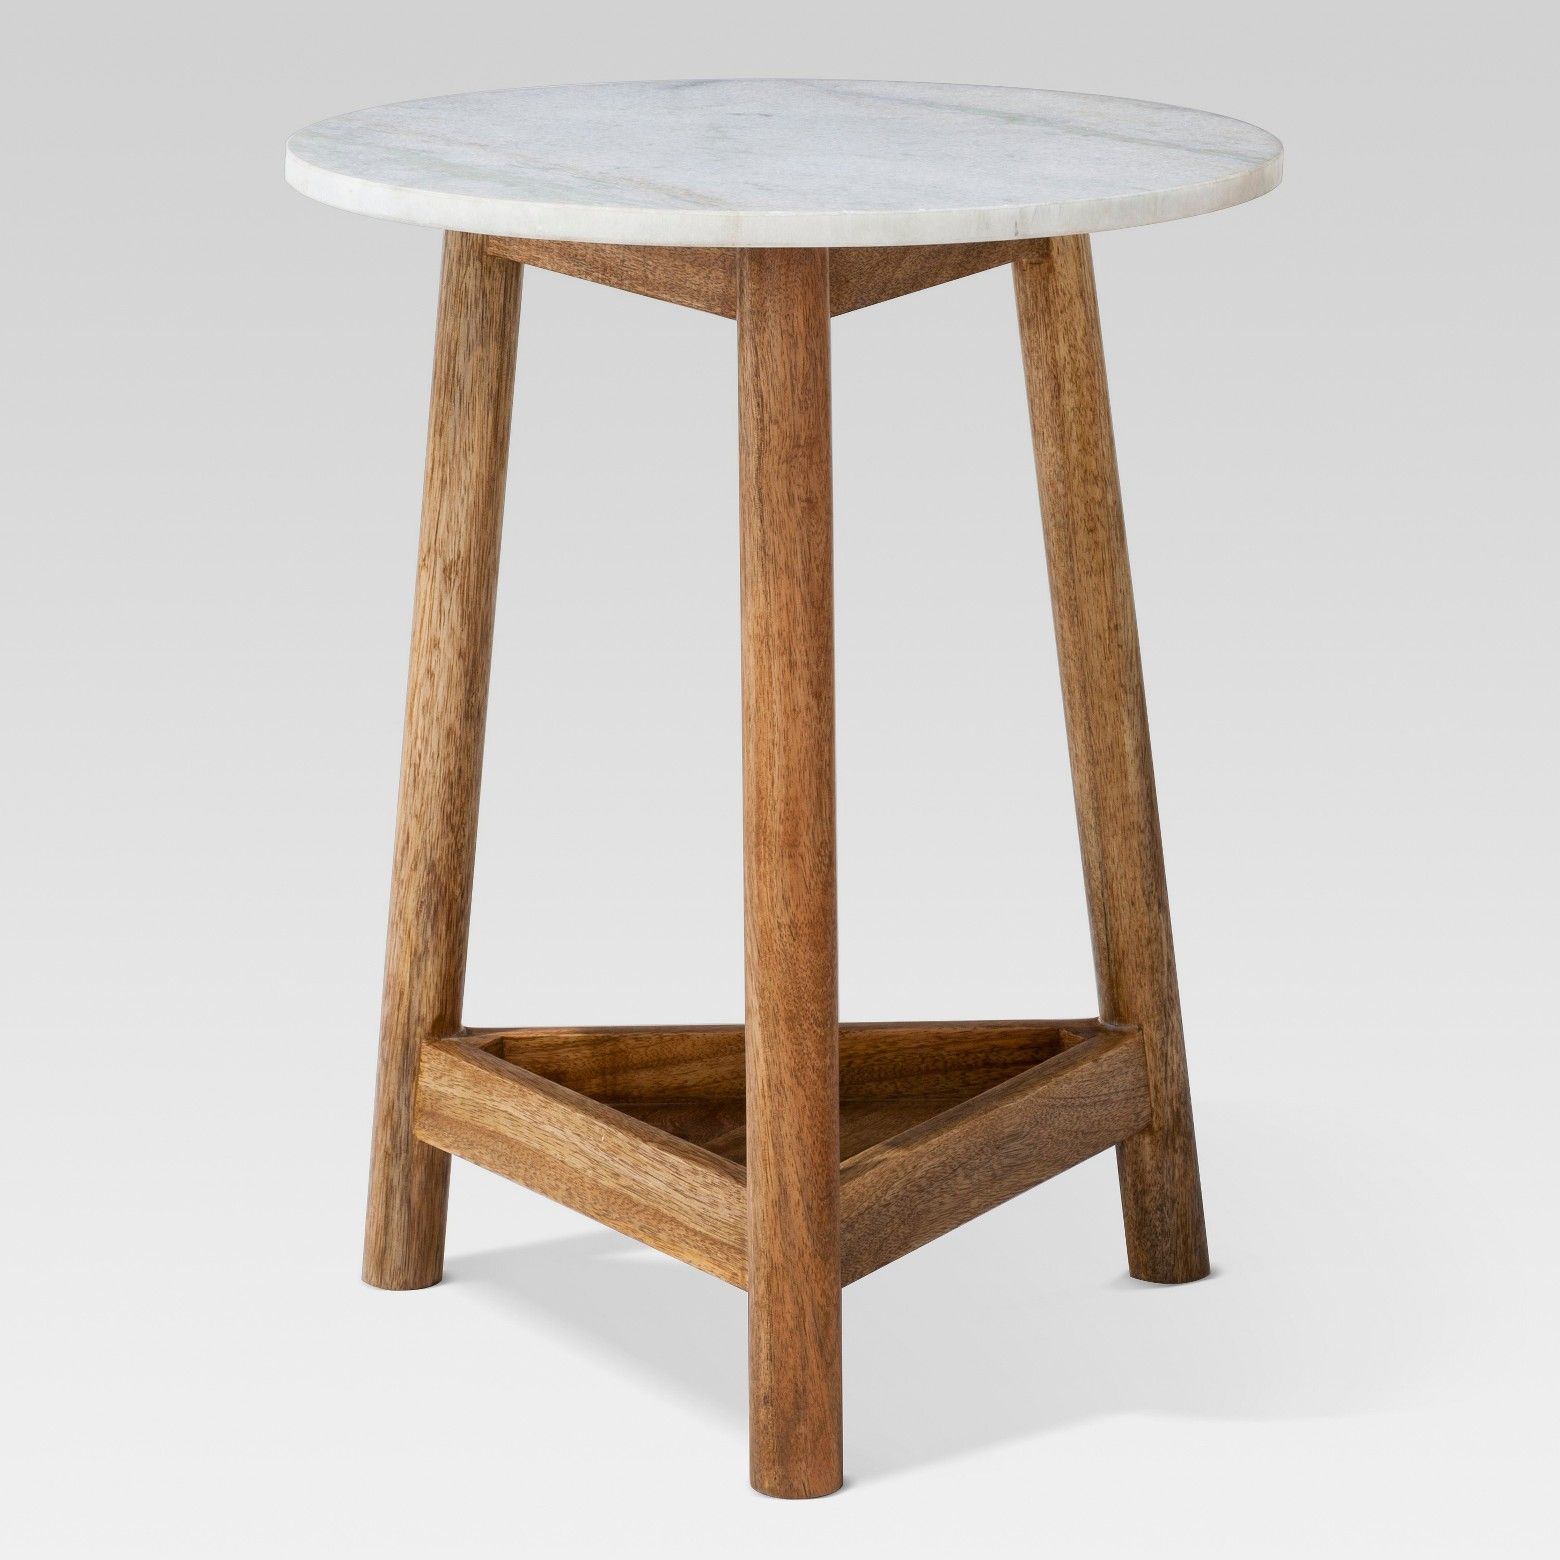 the lanham marble top side table from threshold has beautiful accent mango wood blend and reg wedge shaped end dryers small dining set replica iconic furniture mosaic bedside